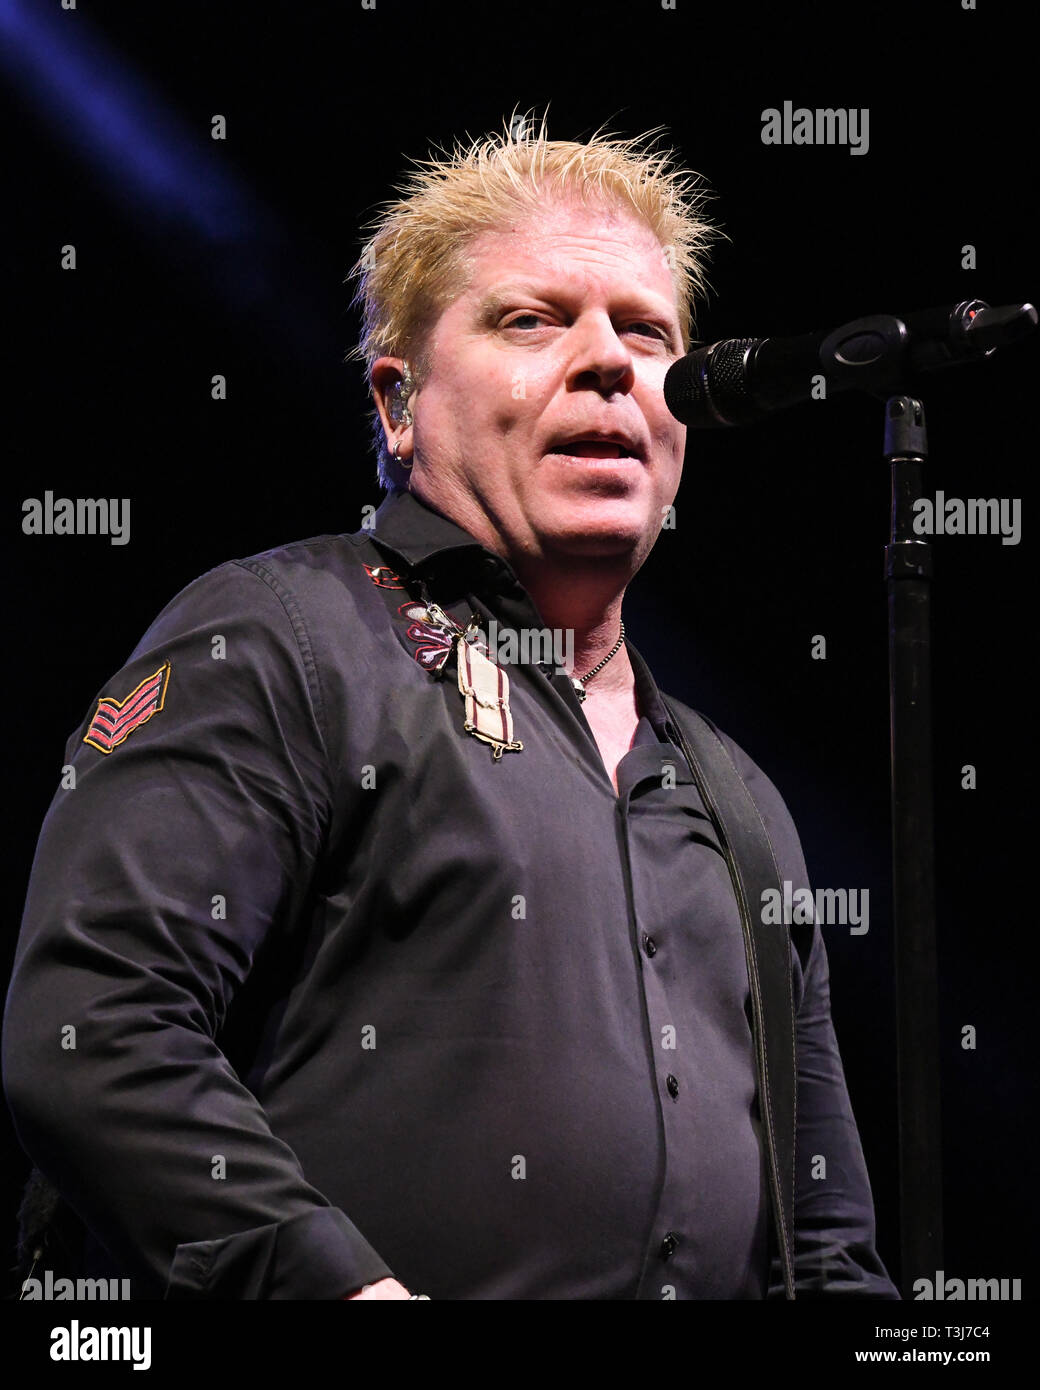 April 7, 2019 - Dana Point, California, USA - Vocalist DEXTER HOLLAND of  The Offspring performs at the Sabroso Craft Beer, Taco & Music Festival  2019 Sunday (Day 2) at Doheny State